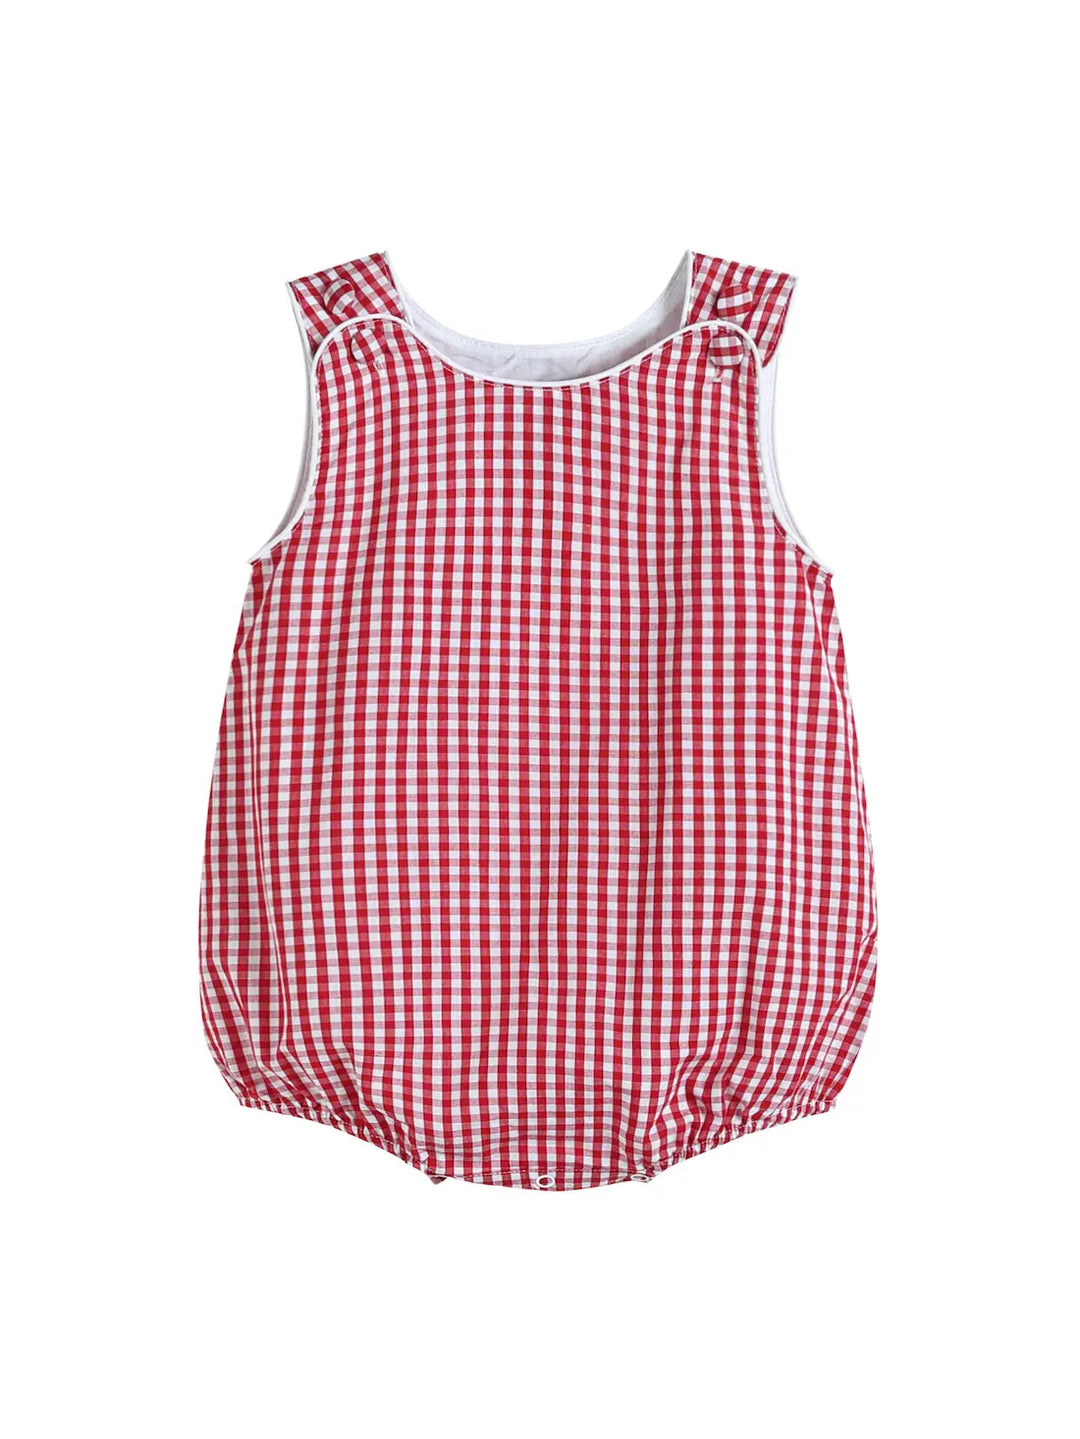 Classic Red Gingham Baby Bubble Romper